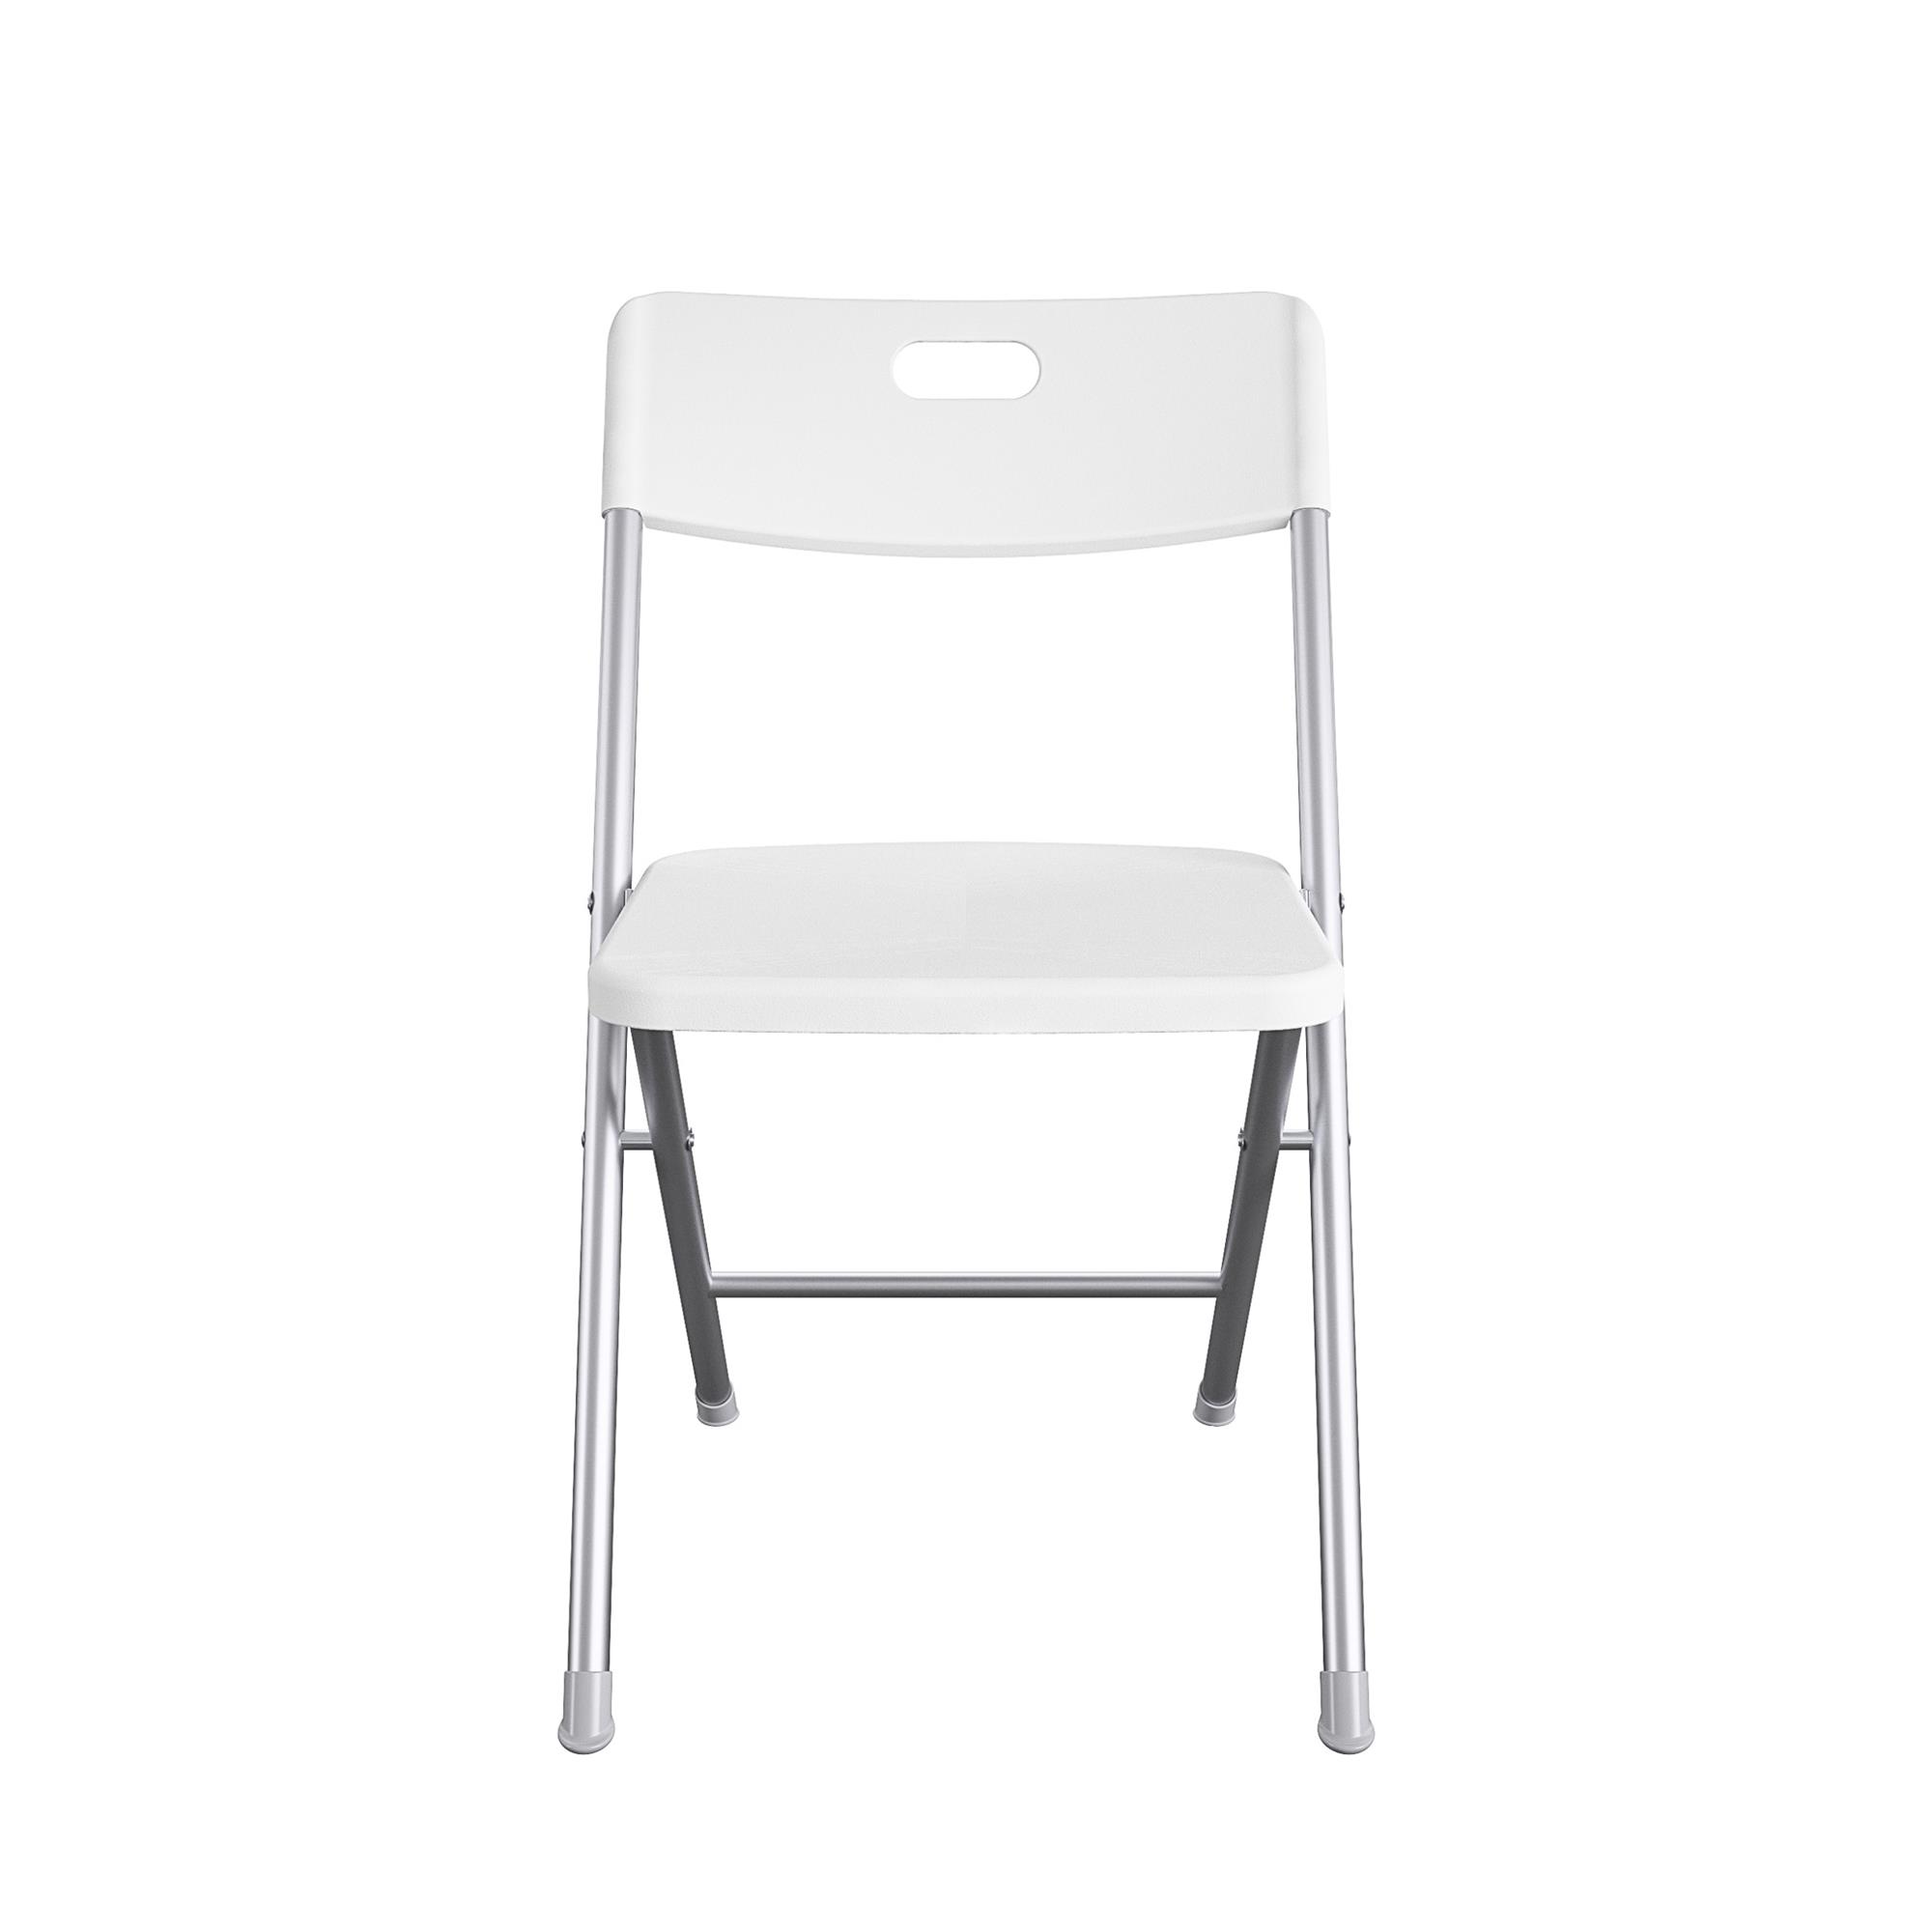 Mainstays Resin Seat & Back Folding Chair, White - image 2 of 7